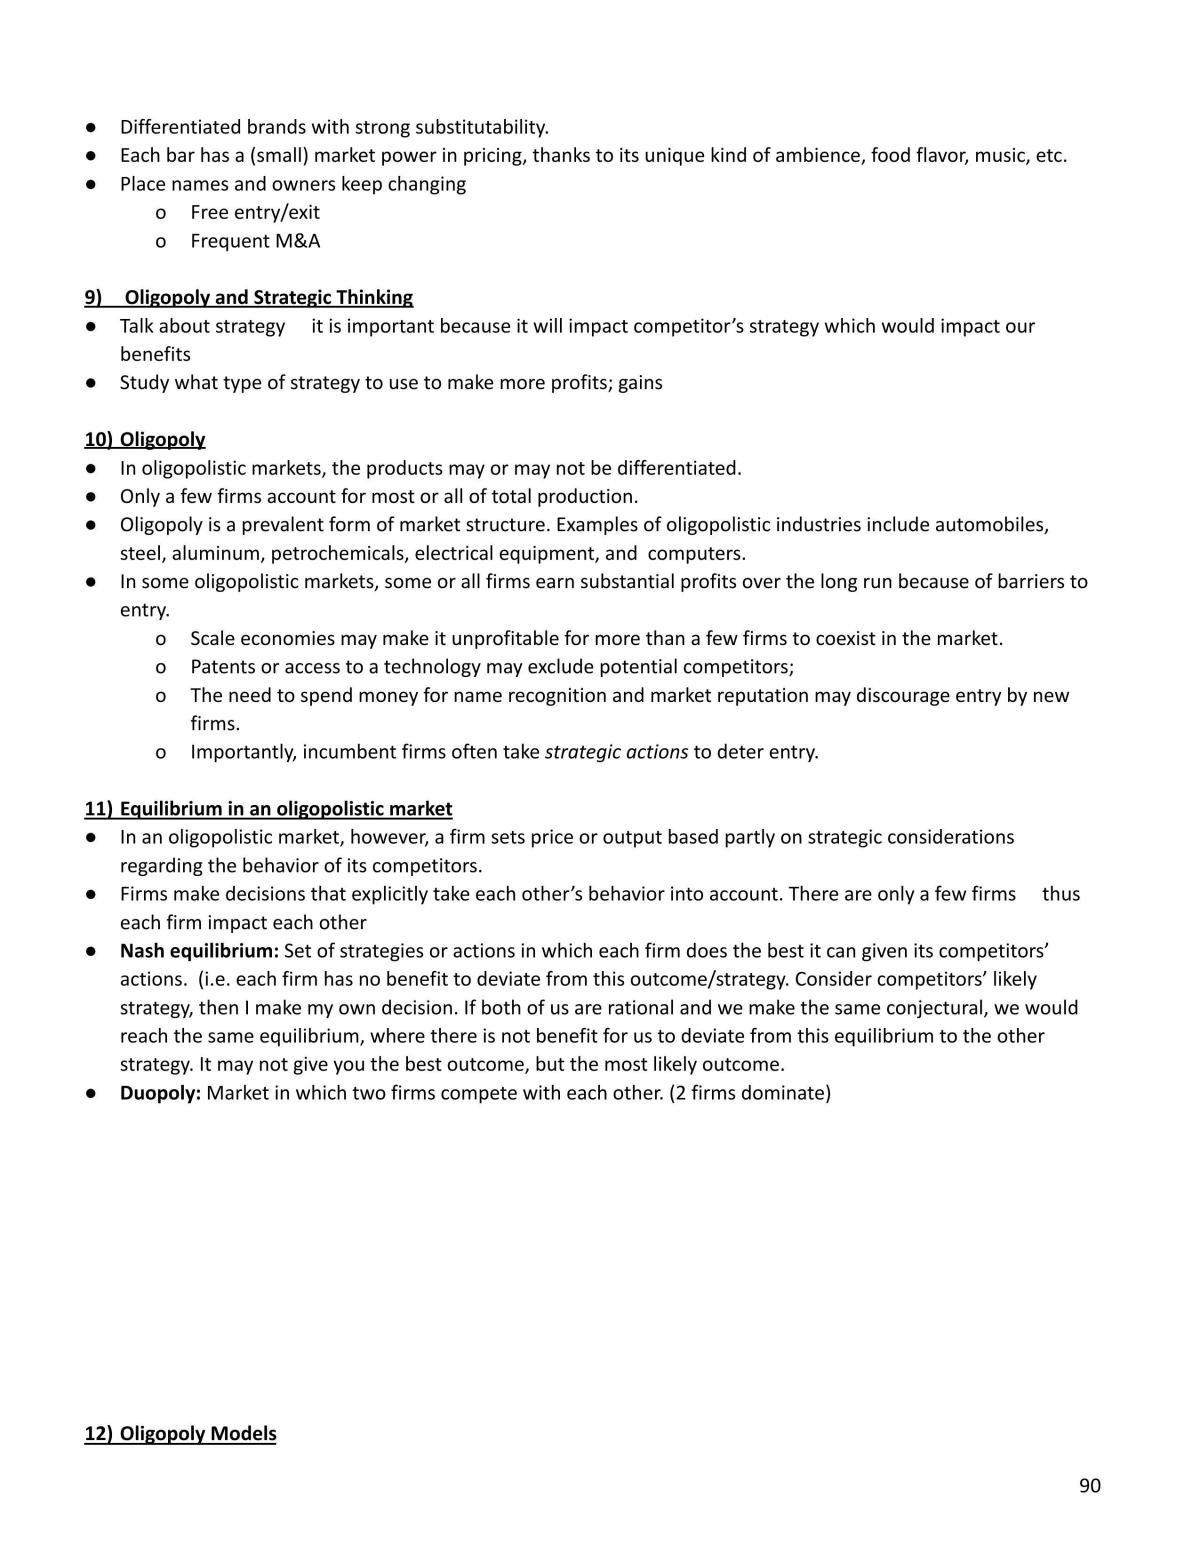 BSP1703 Complete Notes - Page 90